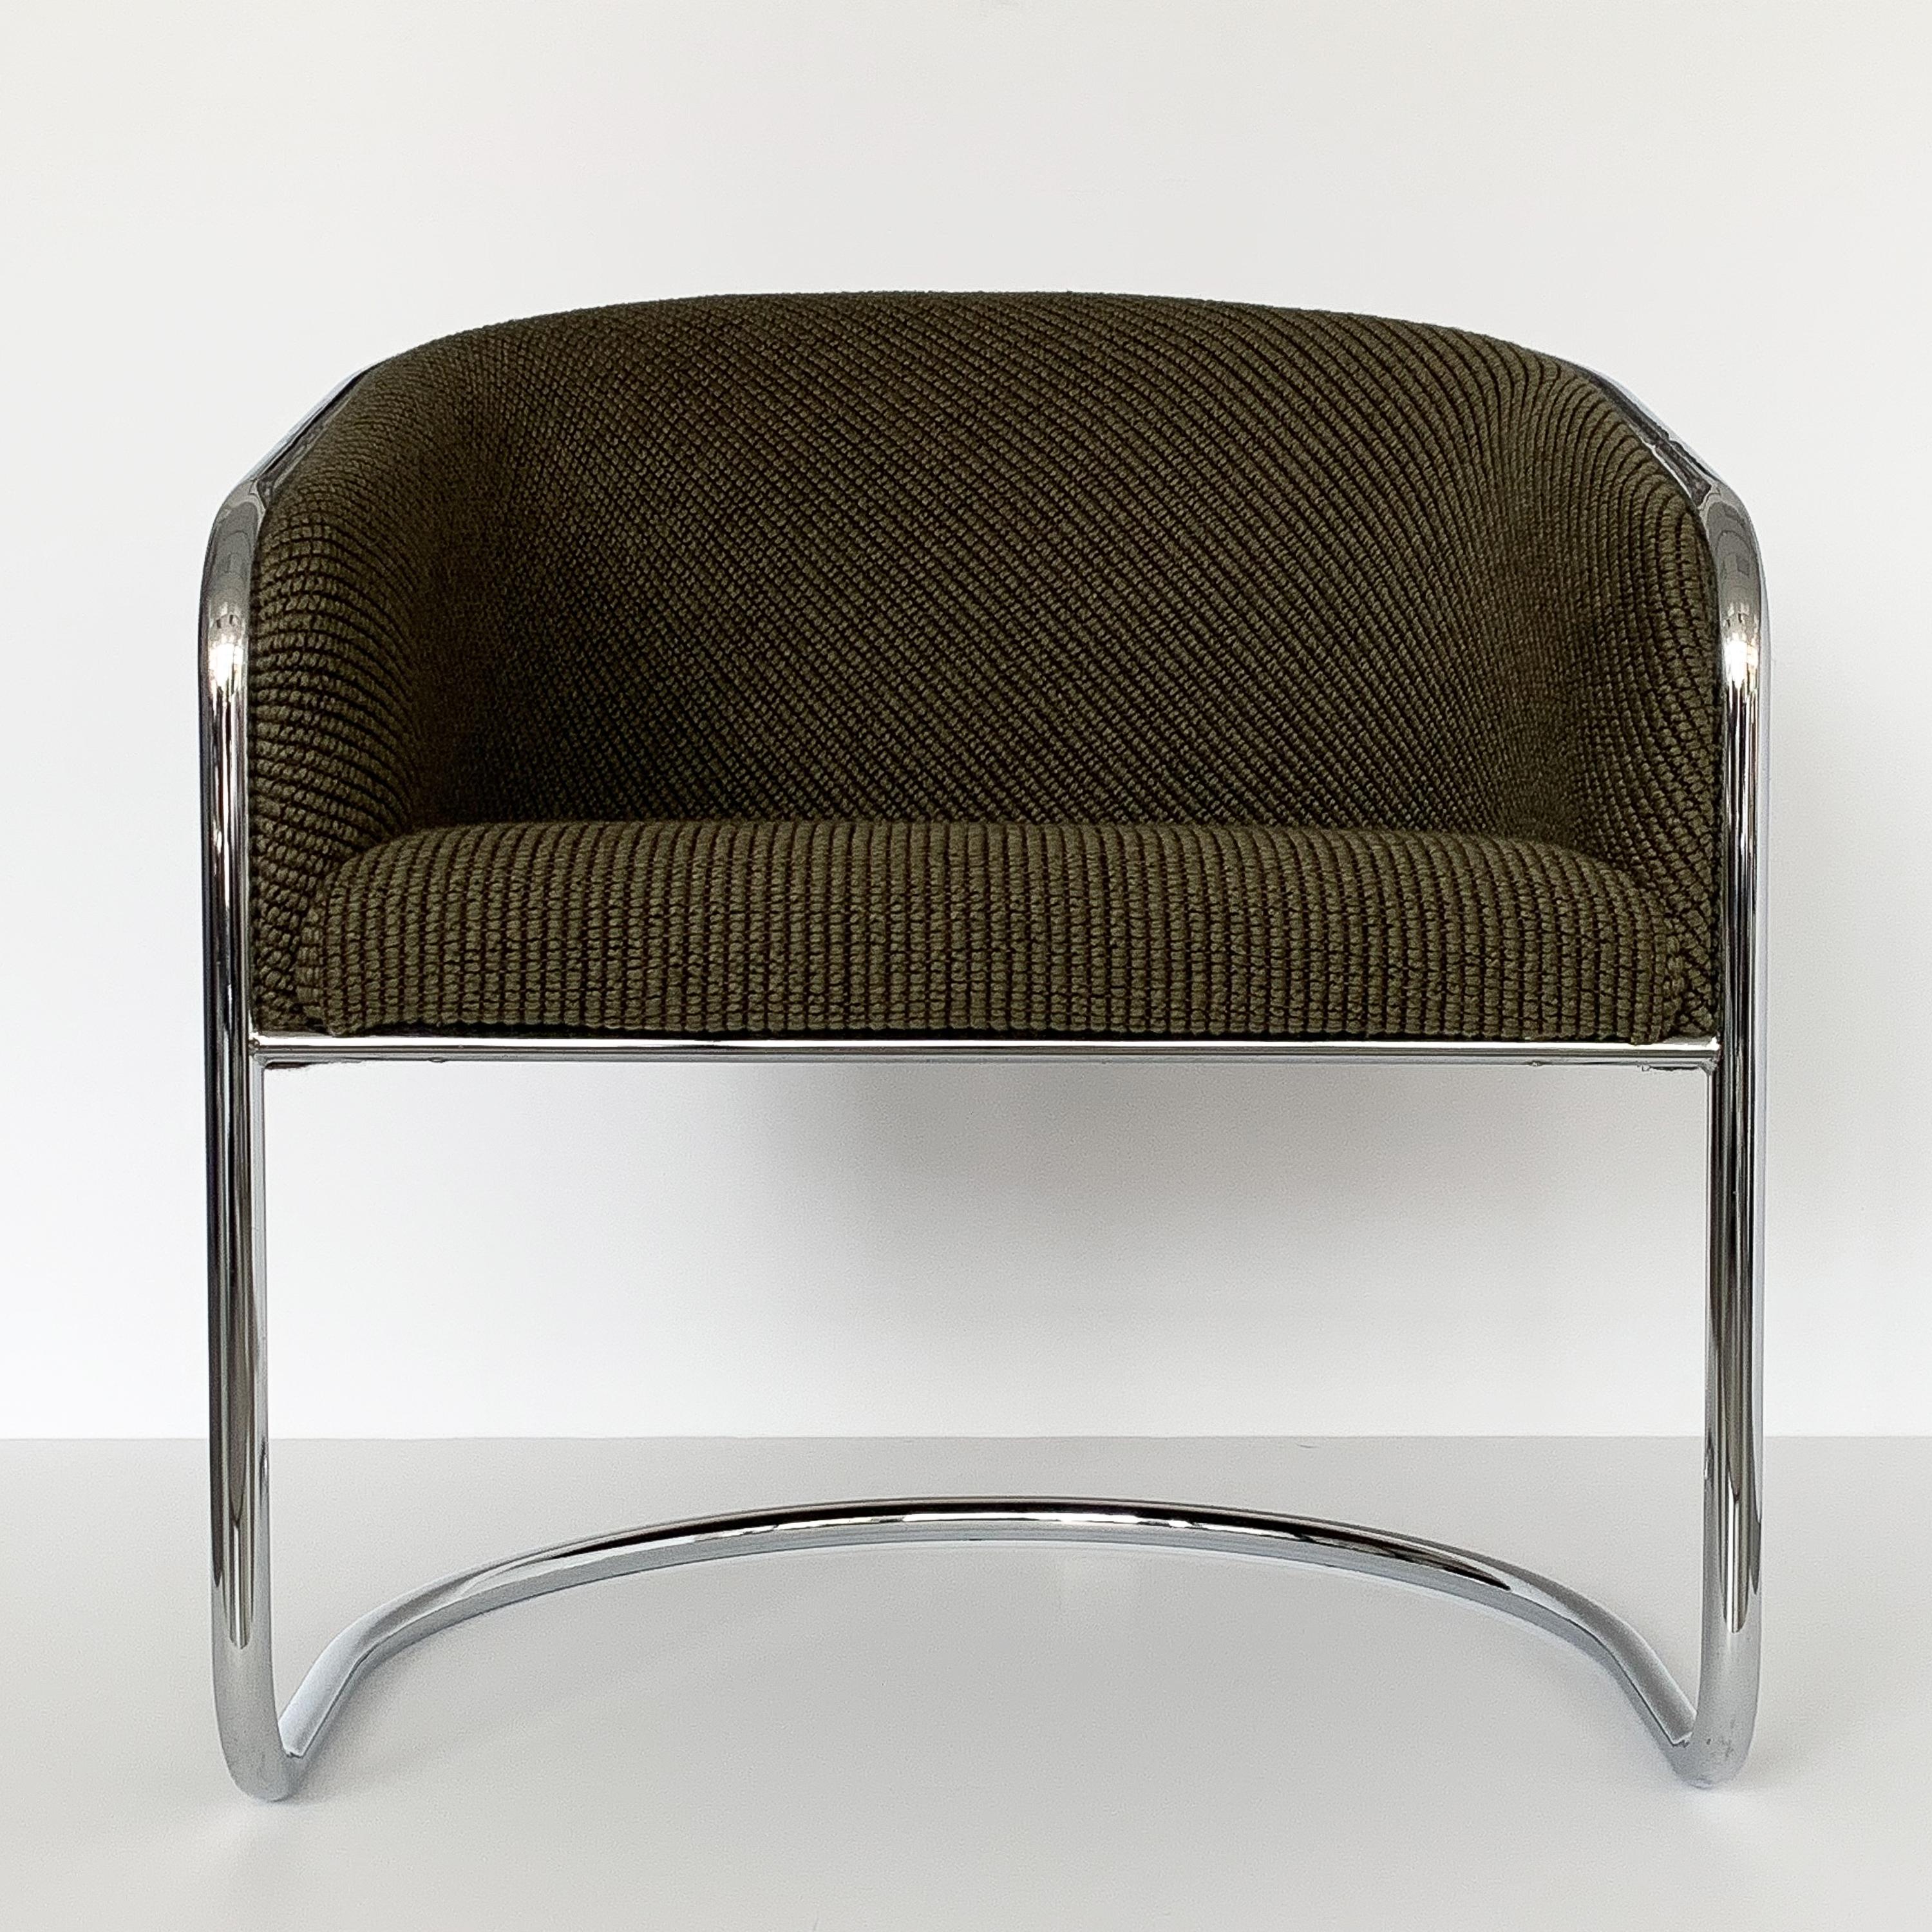 Pair of tub / club cantilever dining or lounge chairs by Joan Burgasser / Anton Lorenz for Thonet, circa 1970s. Chrome-plated tubular steel frames. Original moss / army green textured upholstery is in excellent condition. The ribbed woven fabric is